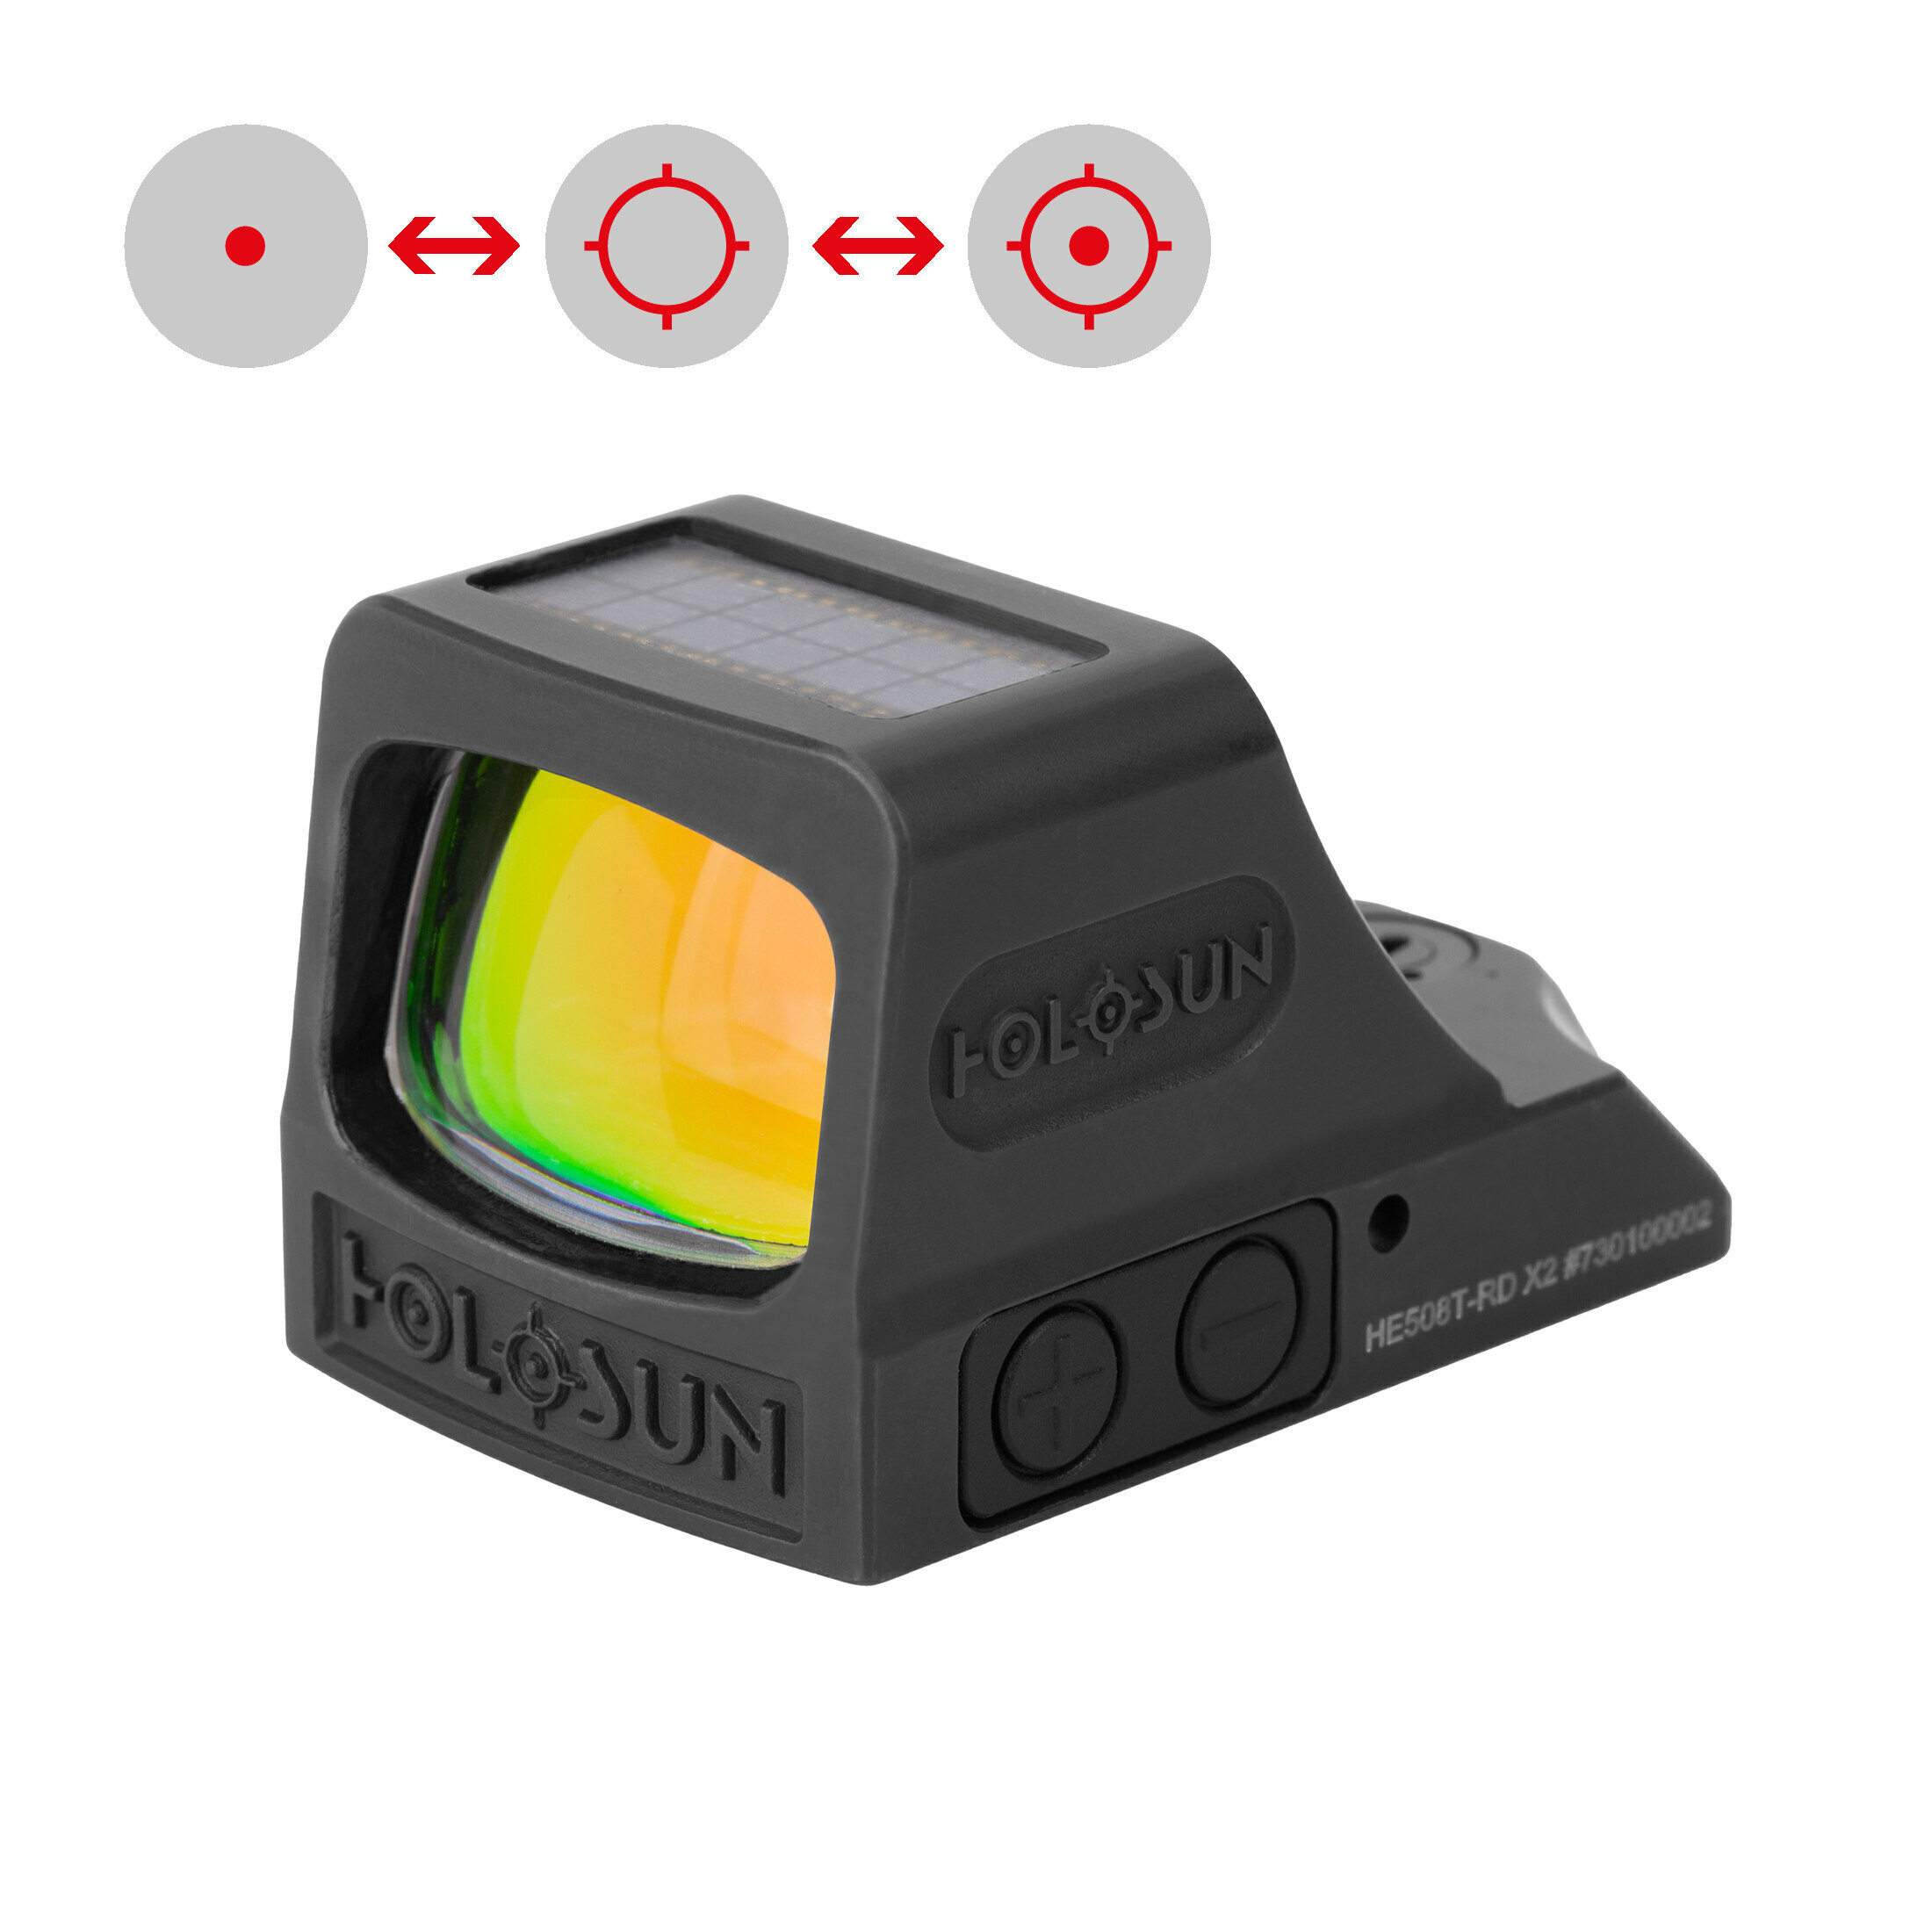 Holosun open reflex sight HE508T-RD-X2 with interchangeable reticle, innovative lock mode, and tita…